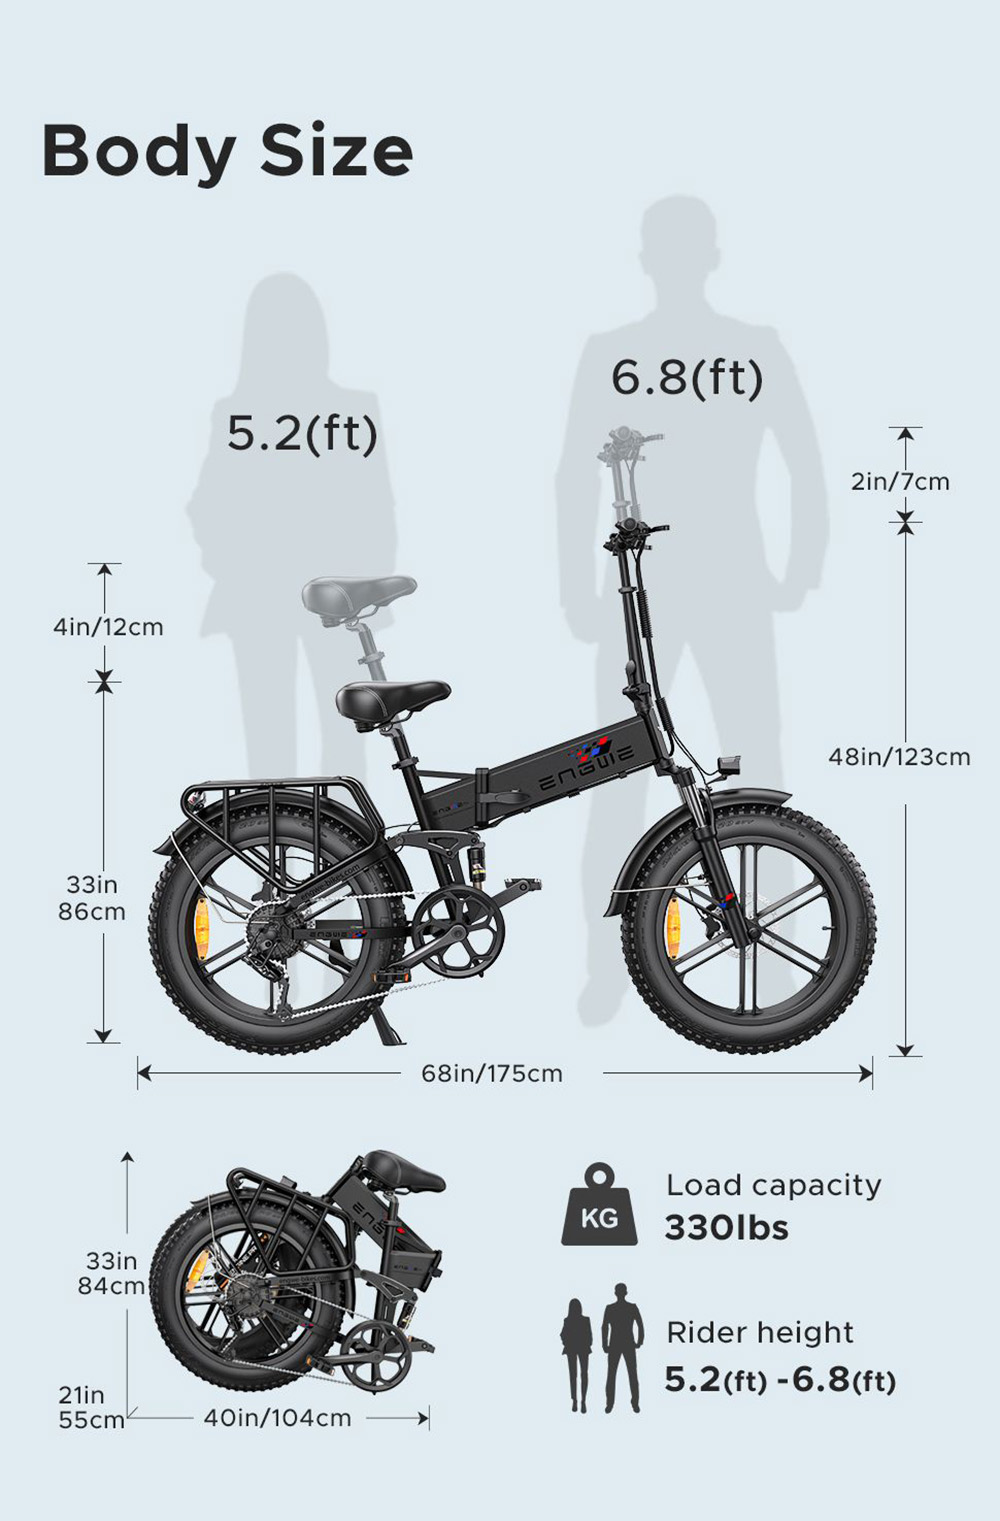 ENGWE ENGINE Pro Folding Electric Bicycle 20*4.0 Inch Fat Tire 750W Brushless Motor 48V 16Ah Battery 45km/h Max Speed Up to 120KM Range 8 Speed System LCD Smart Display Hydraulic Disc Brakes - Grey